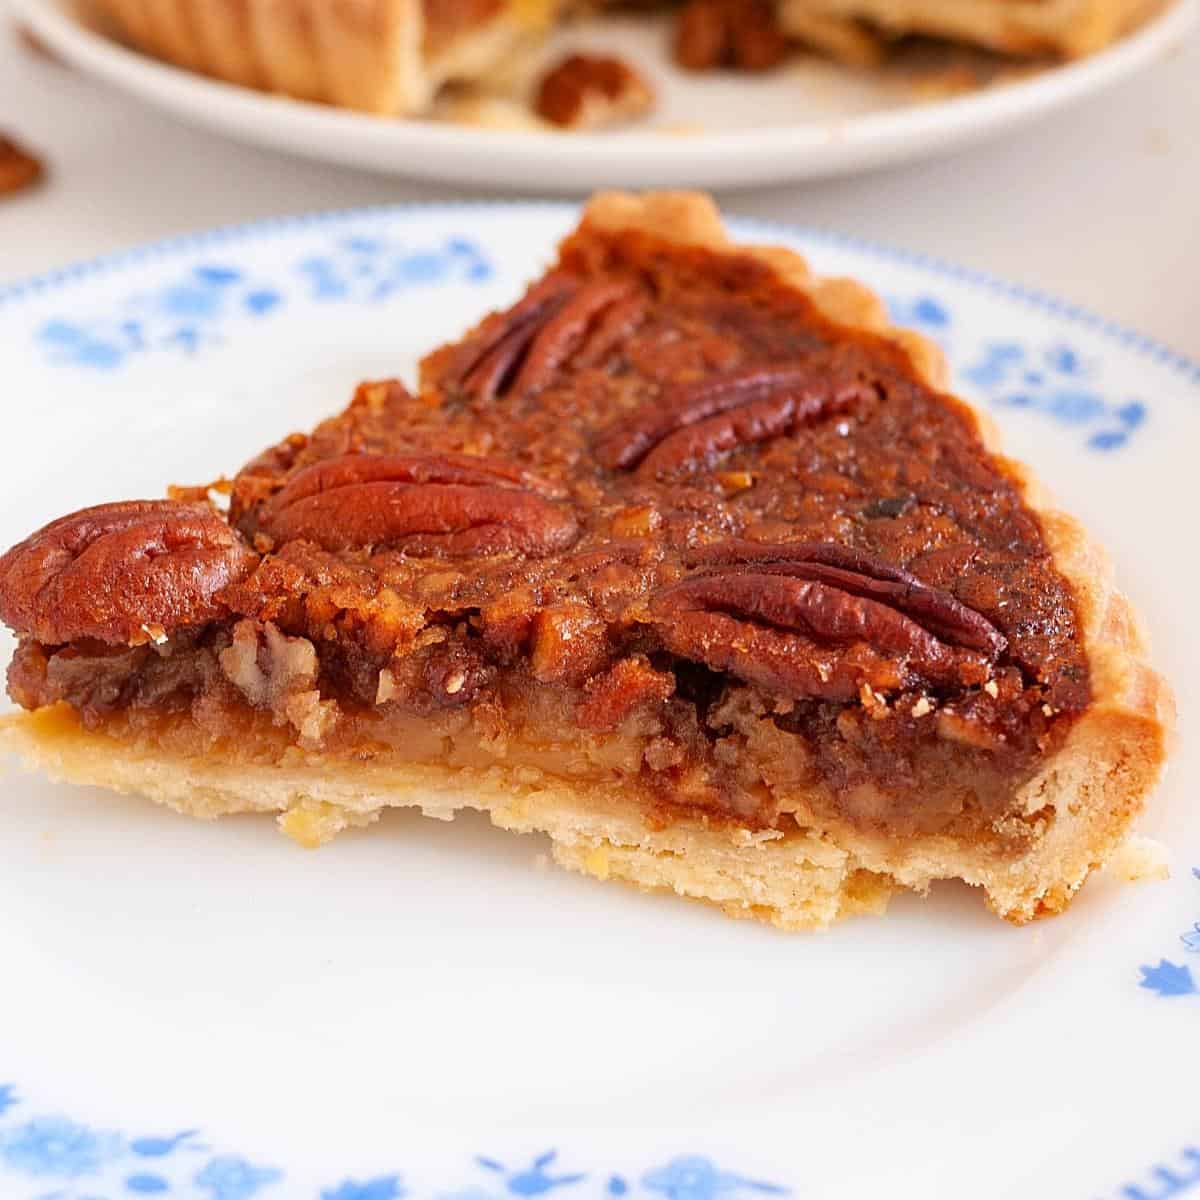 A slice of pecan tart on a plate.